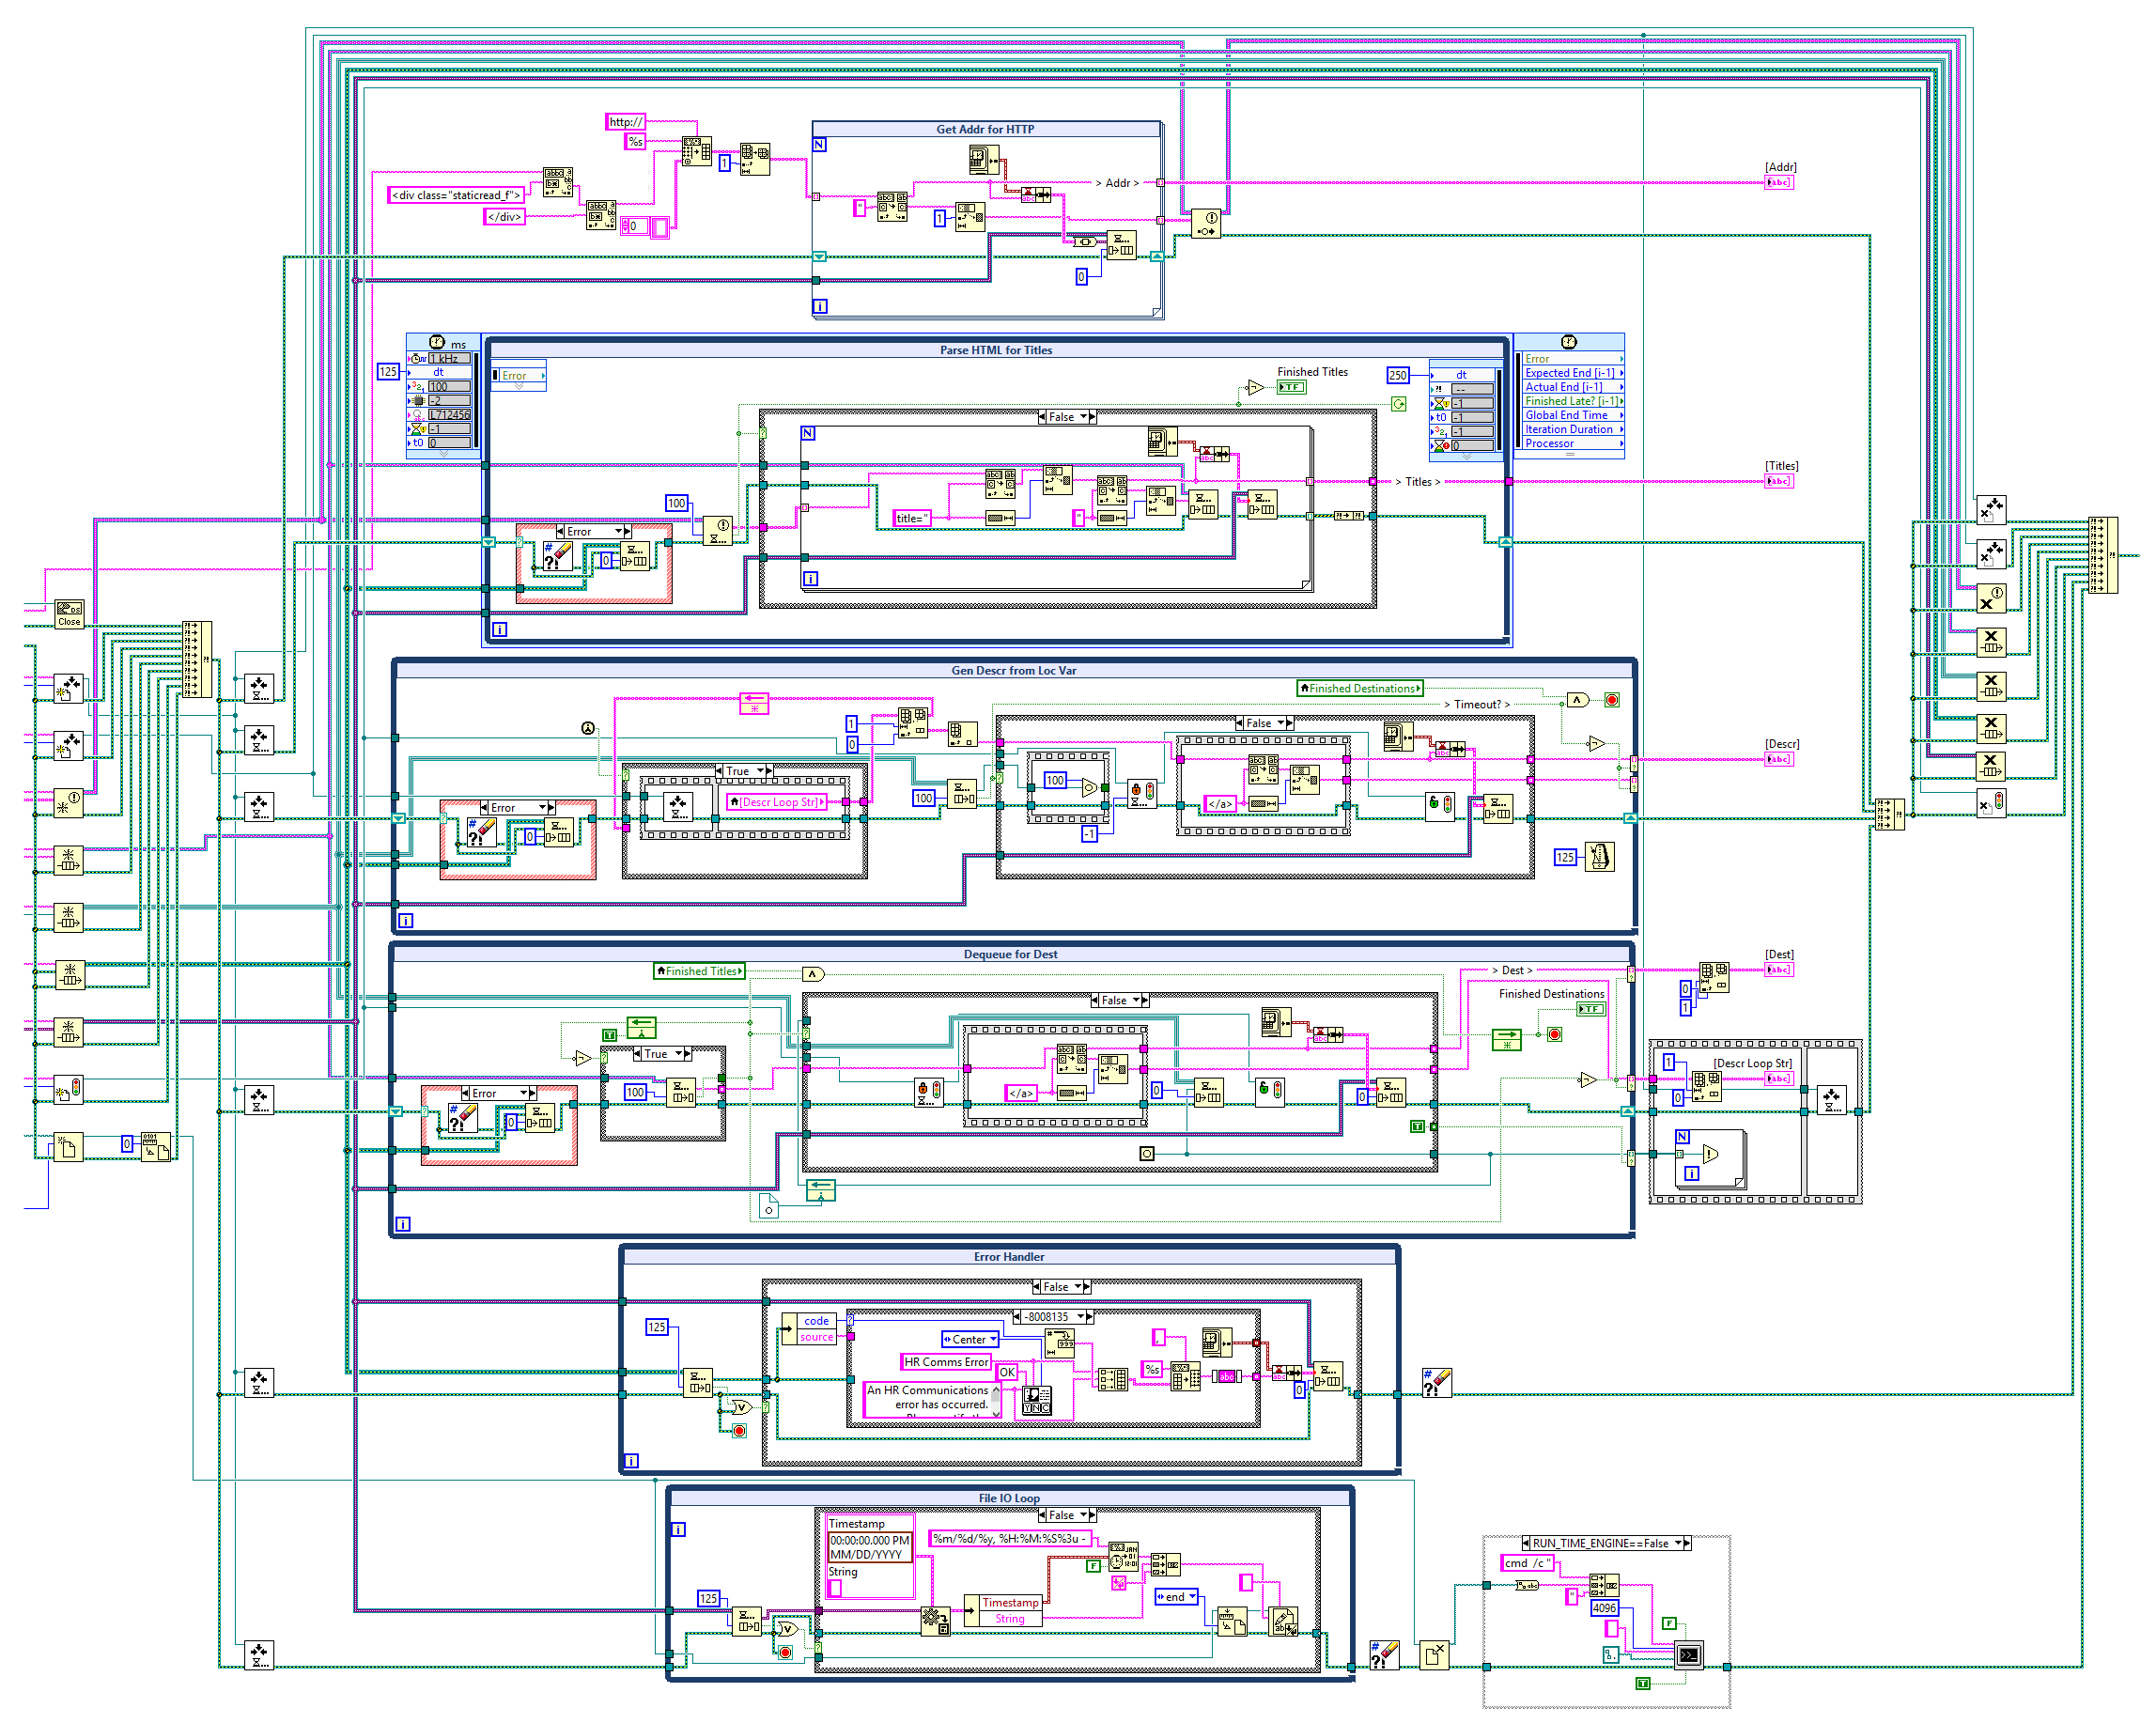 LabVIEW_Poster.png